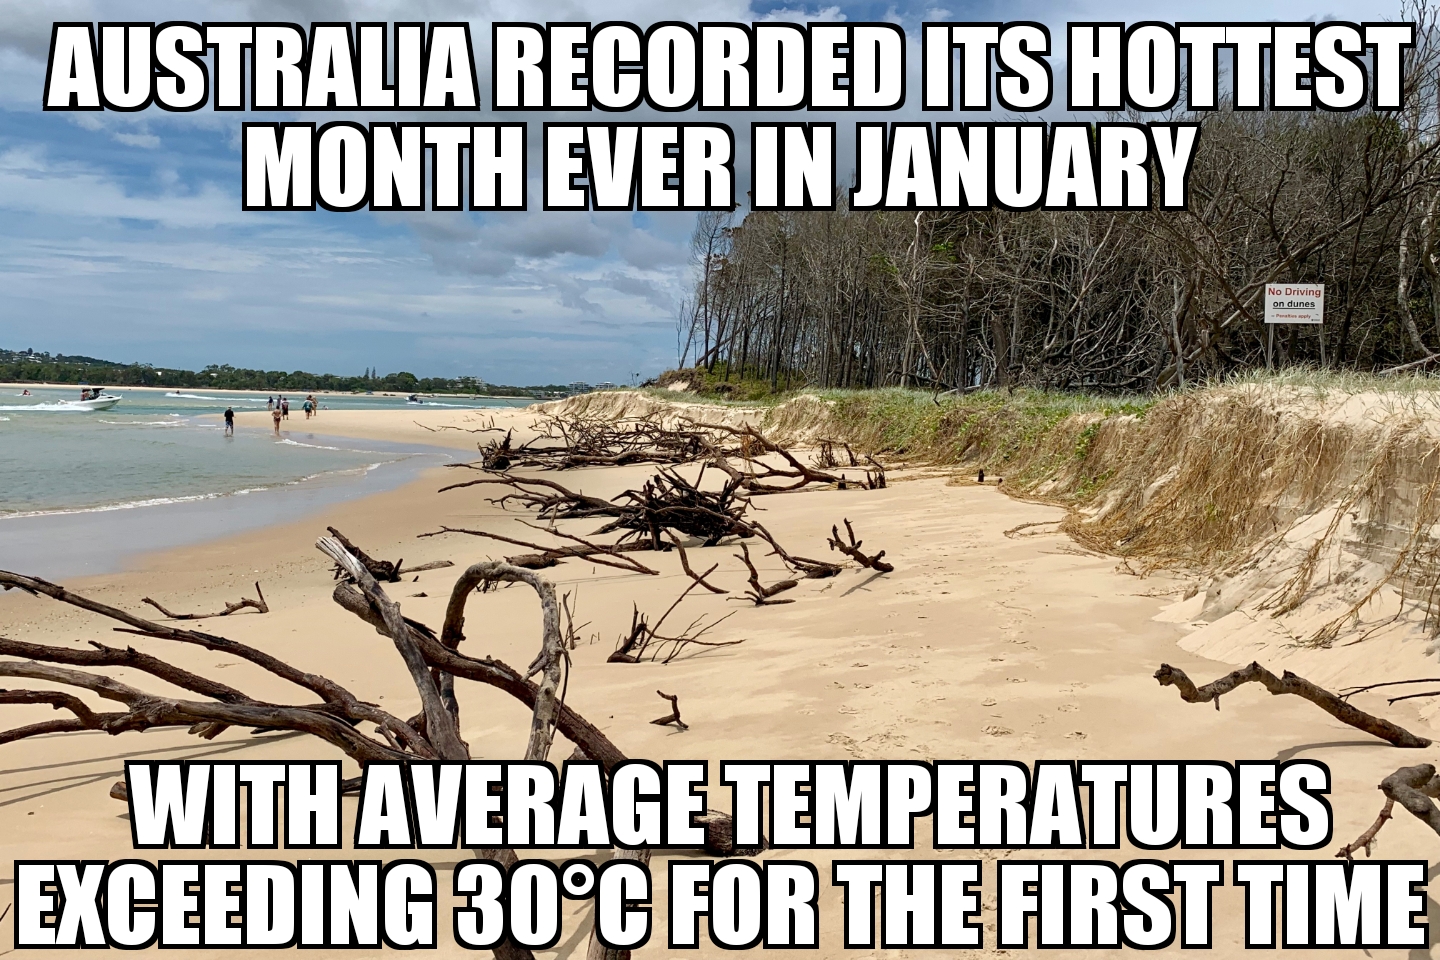 Australia had hottest month ever in January